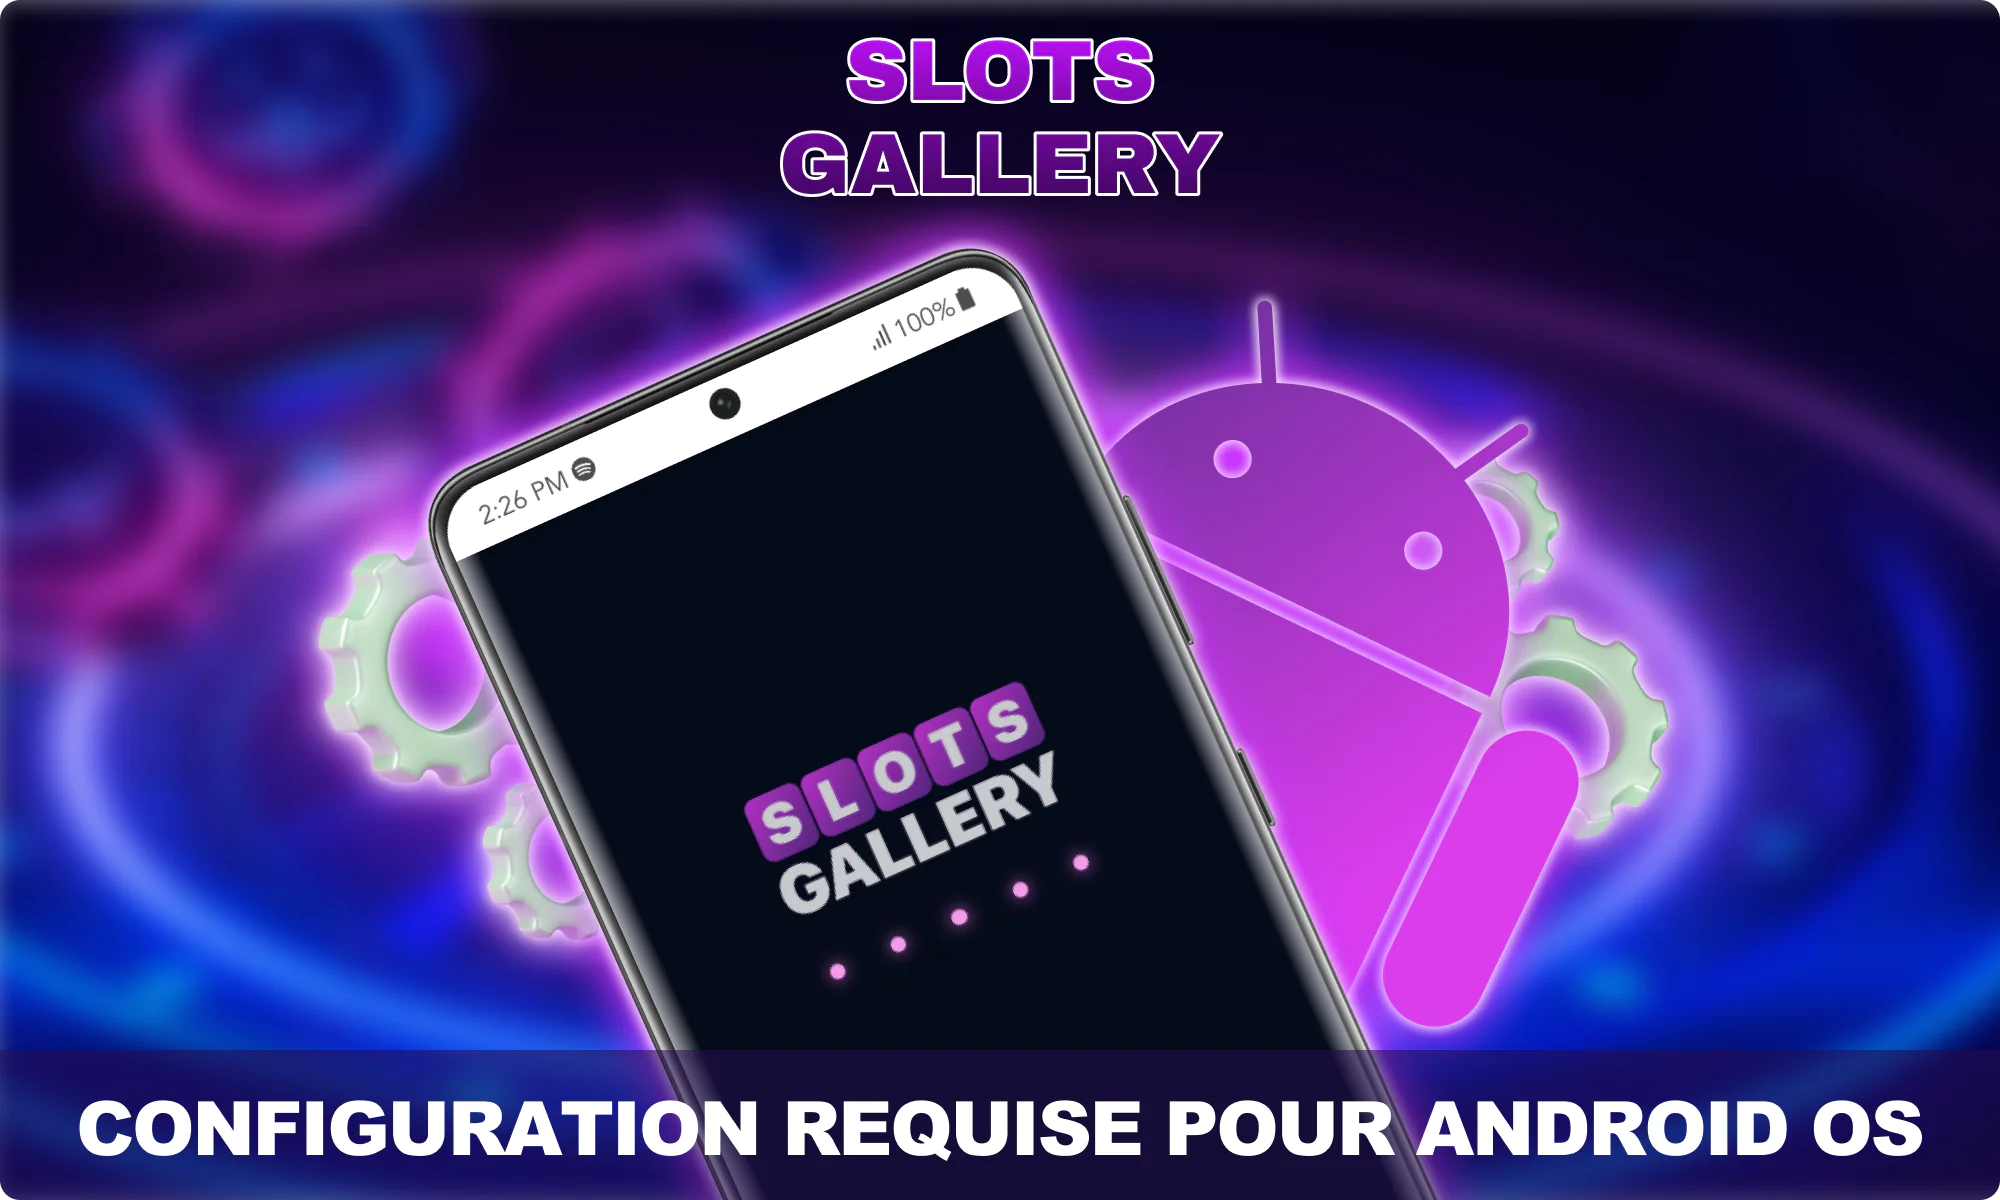 Configuration requise pour Android OS - Slots Gallery Canada